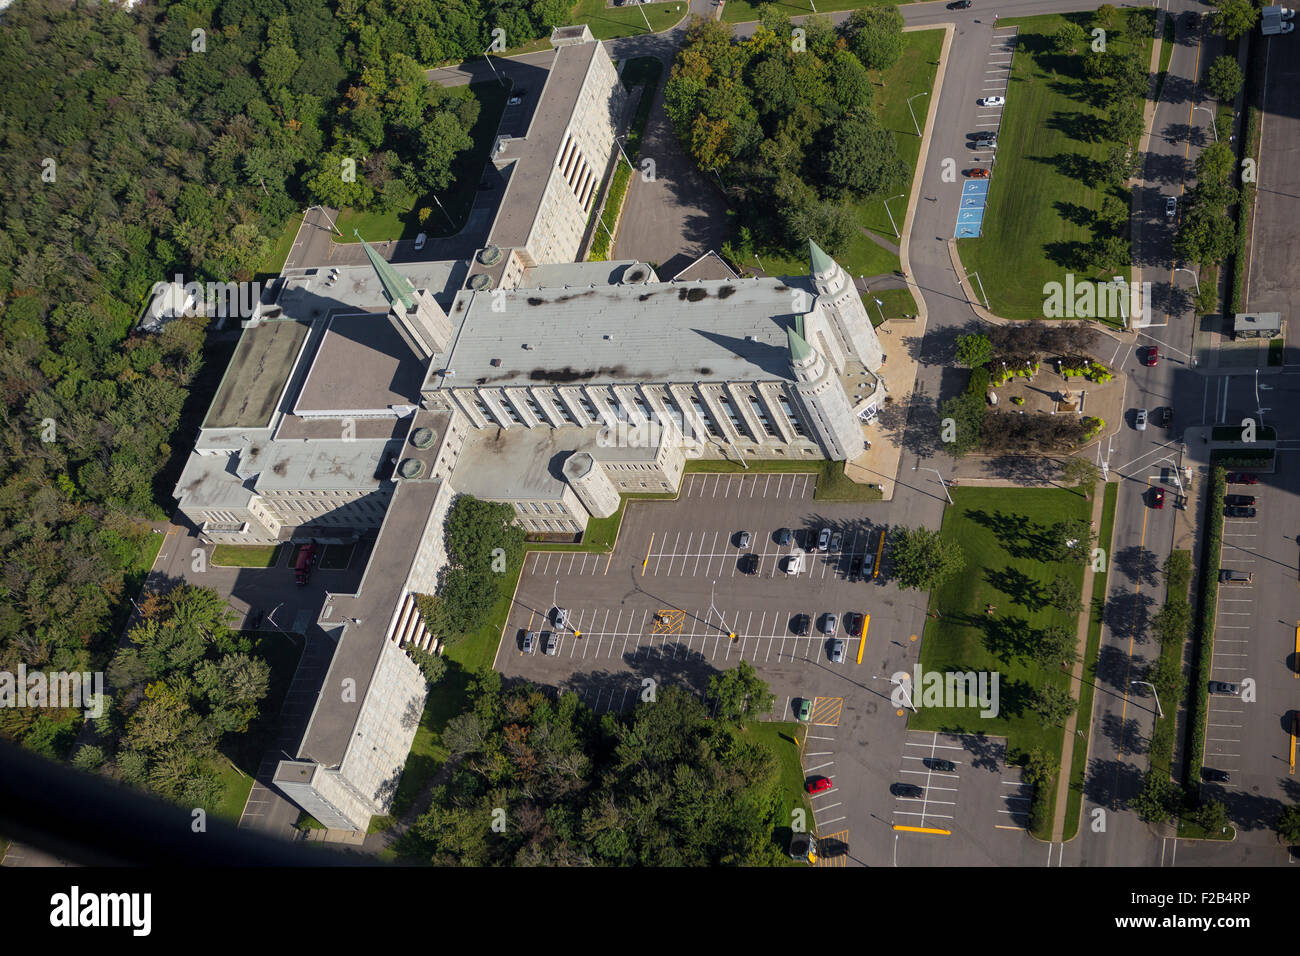 Universite Laval university Pavillon Louis-Jacques-Casault is pictured in this aerial photo in Quebec city Stock Photo